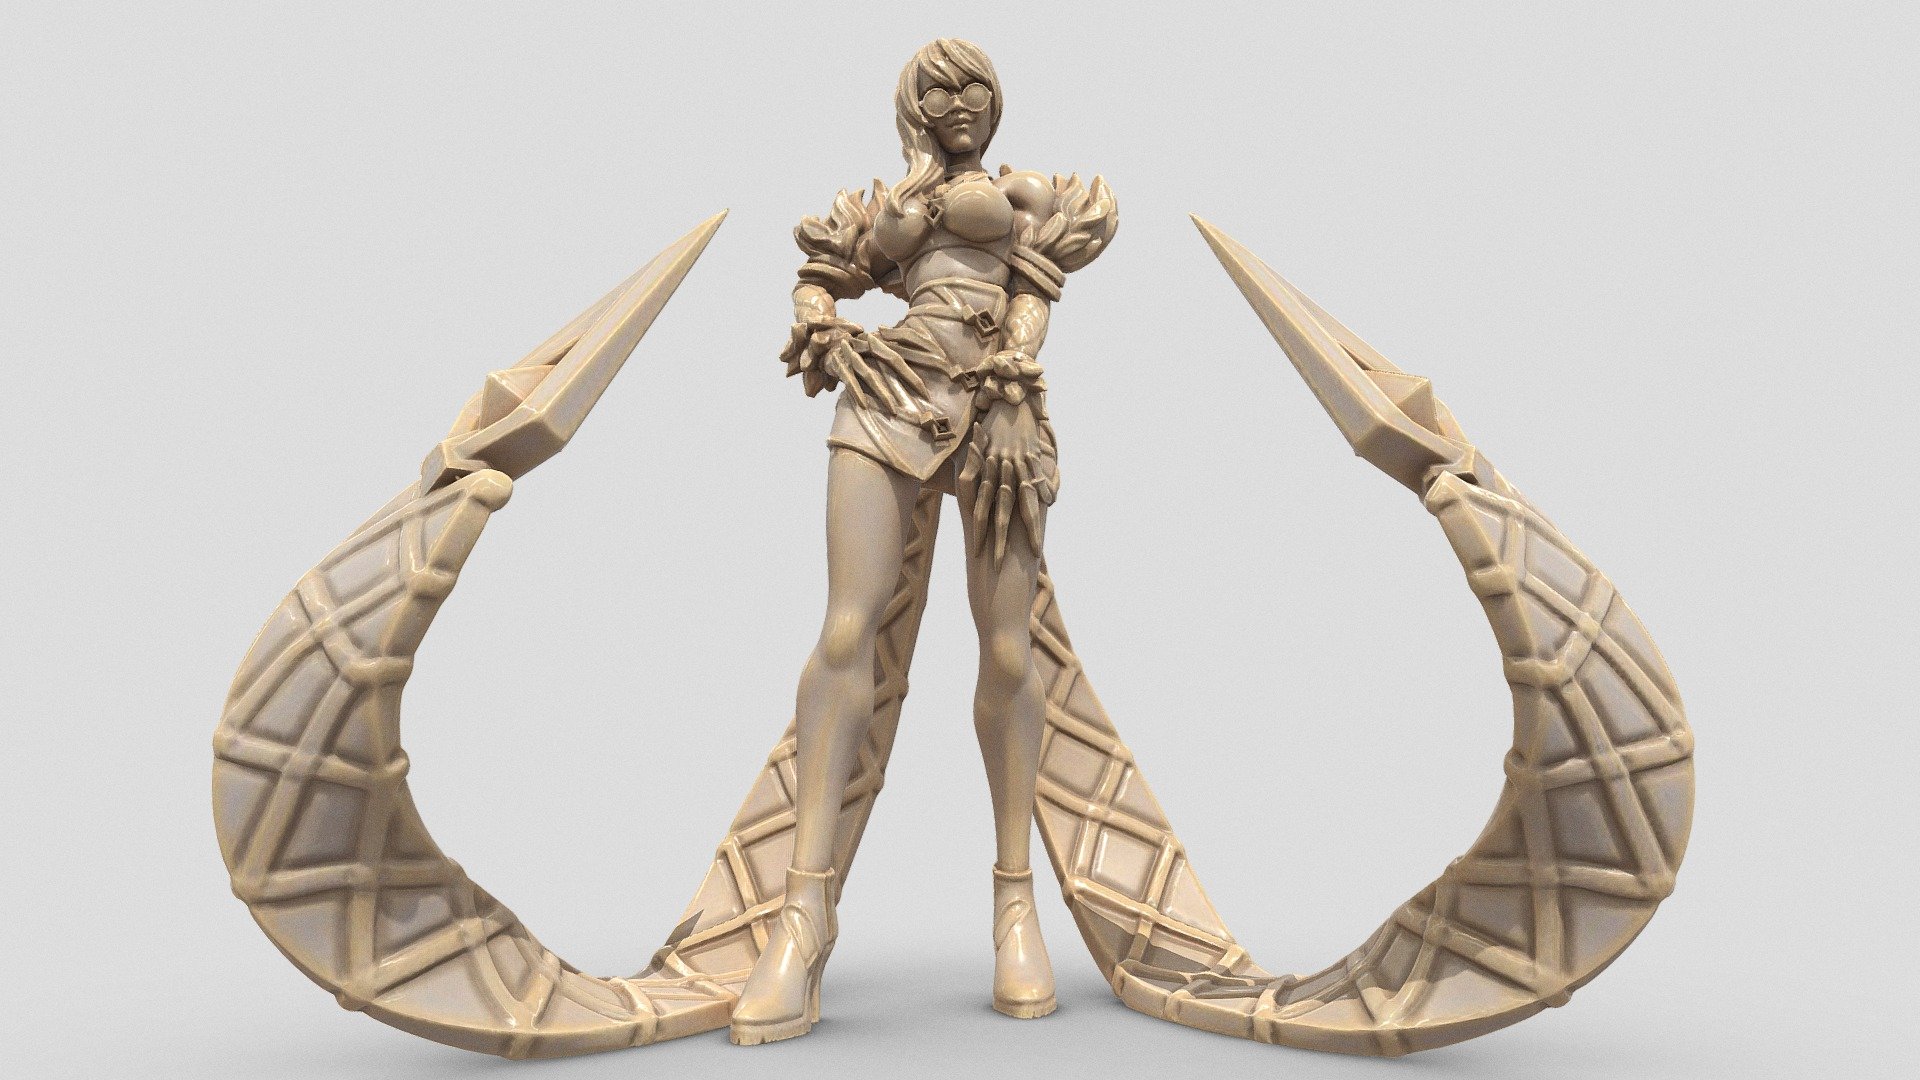 3D Printable version - https://thangs.com/designer/printedobsession/3d-model/Evelynn%20-%20KDA%20-%20League%20of%20Legends%20-%20Fanart%20Model-60476?manualModelView=true








No one is as deliciously volatile as Evelynn. She's a diva who drives divisiveness in the media—they love her one day and hate her the next, her name a permanent fixture of tabloid headlines 3d model